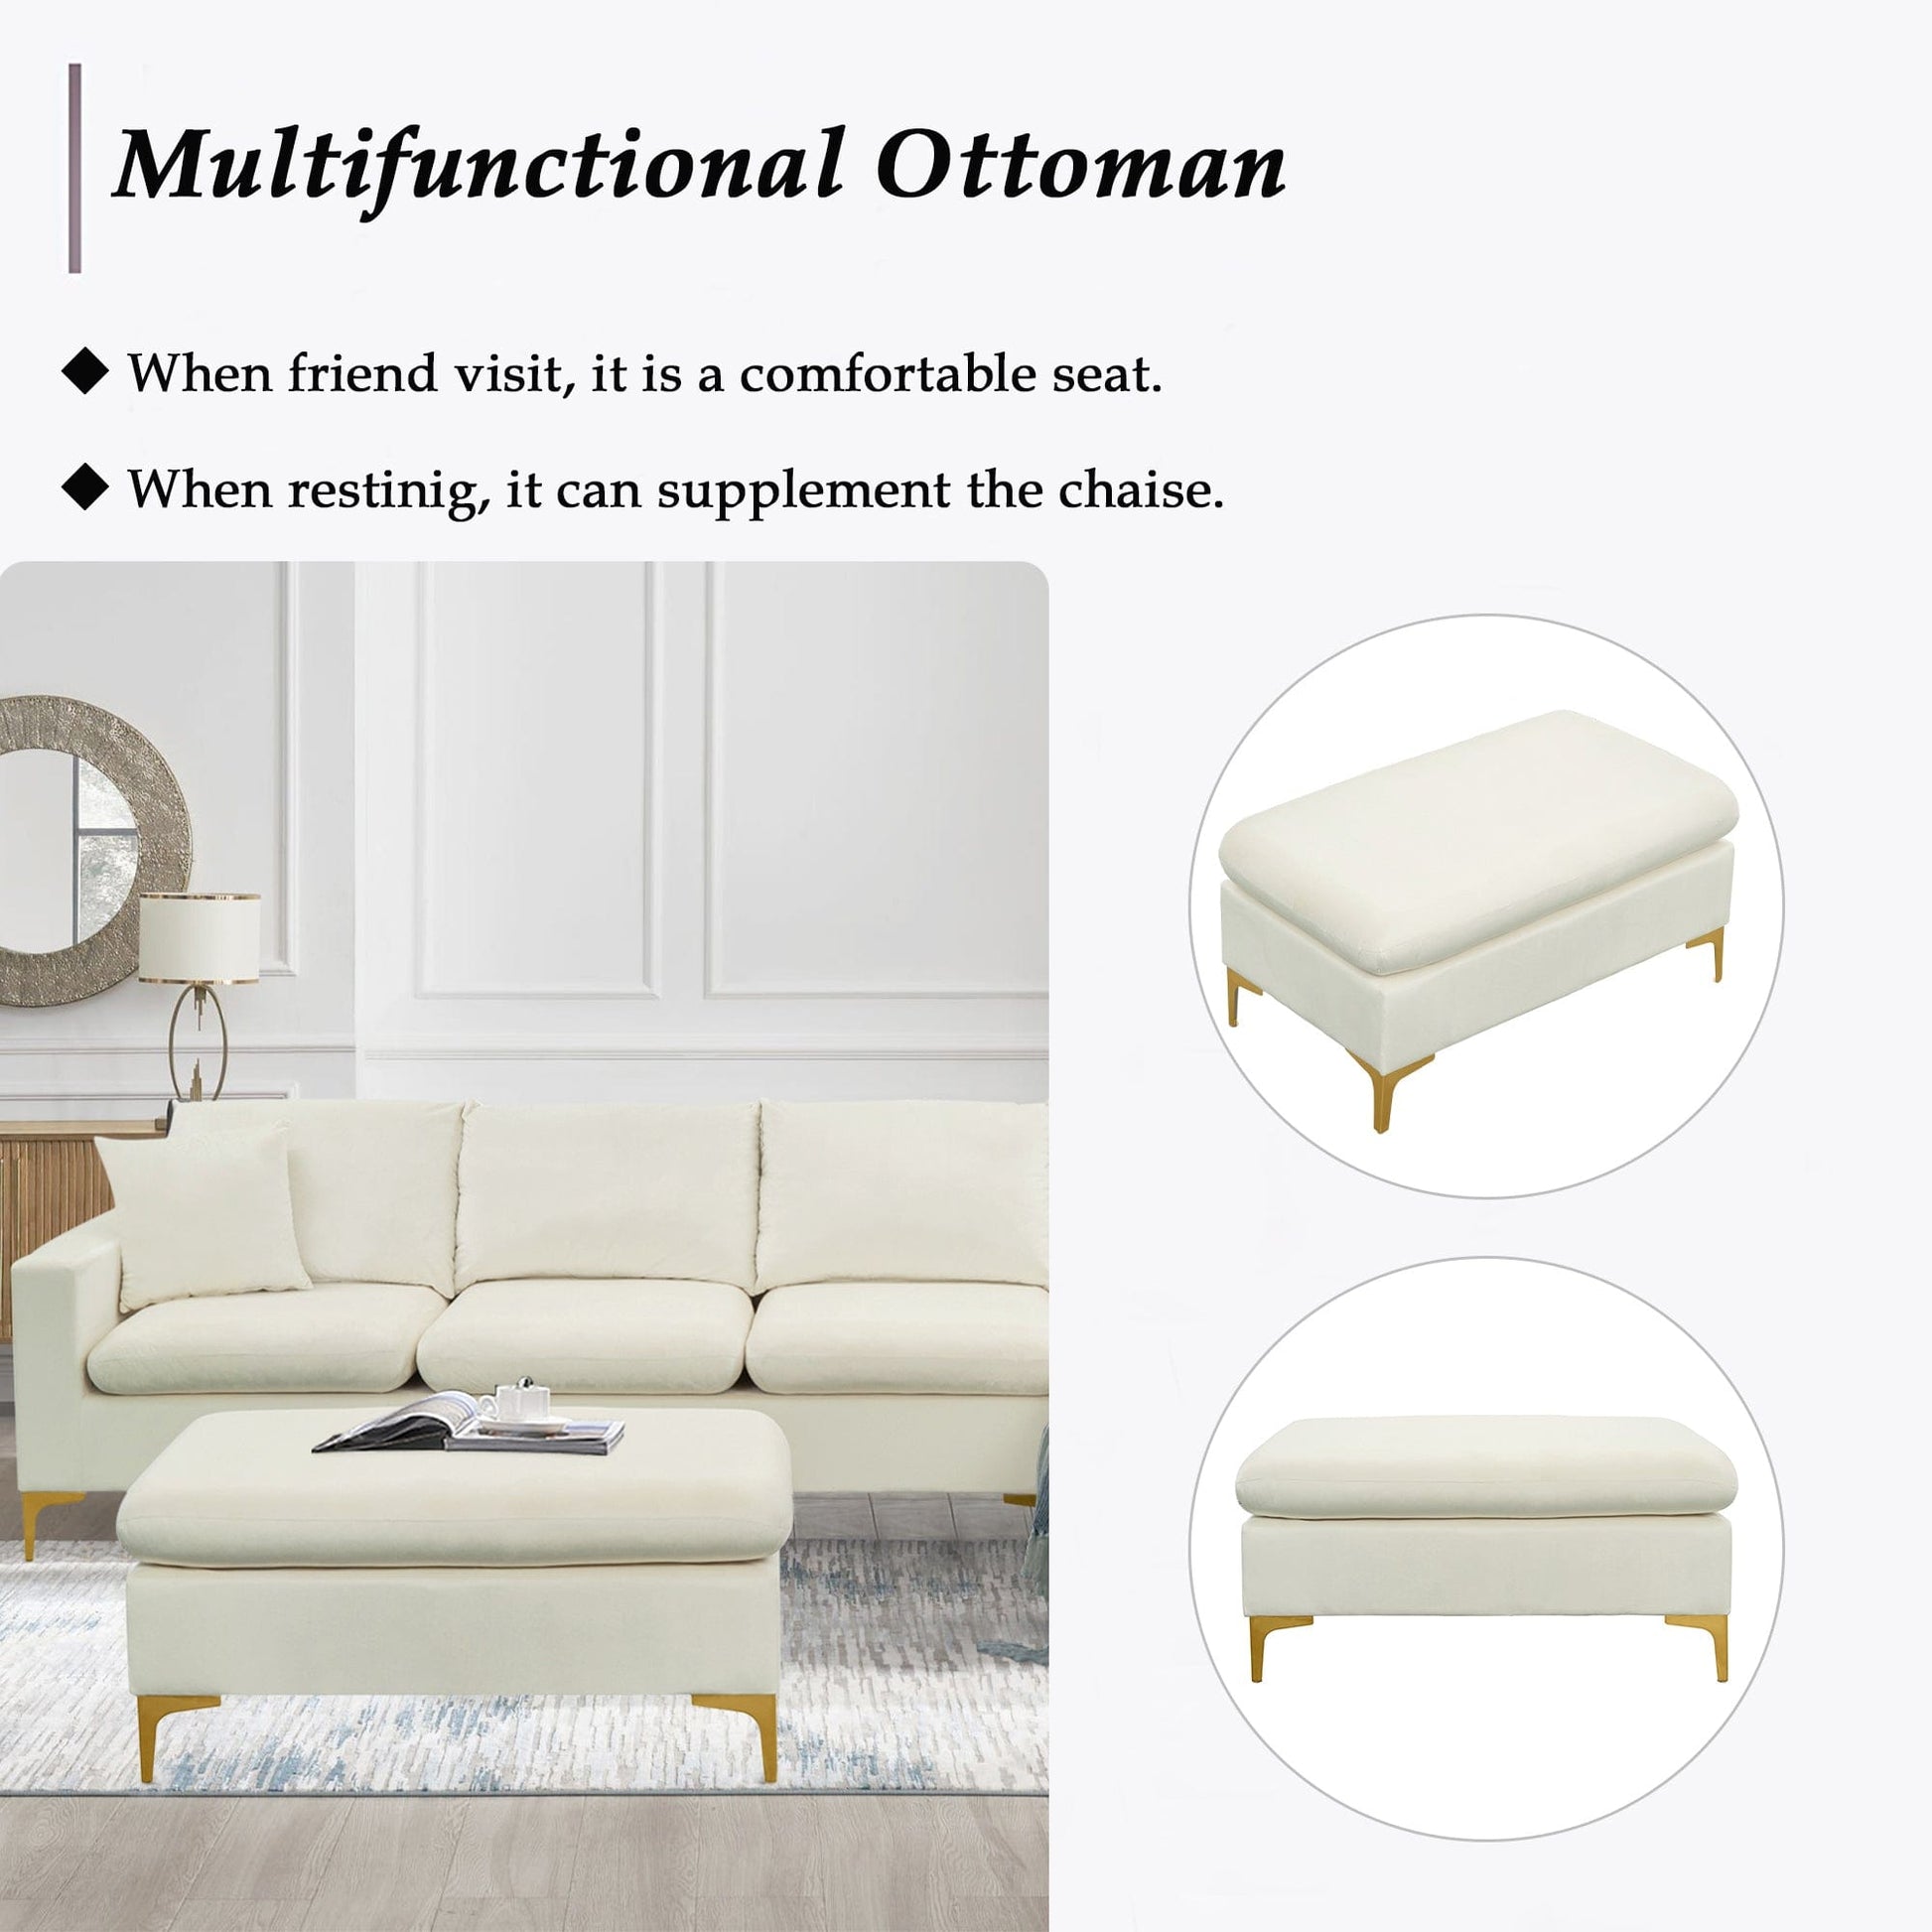 1st Choice Furniture Direct Sectional Sofa & Ottoman 1st Choice Cream White Sectional Sofa Set with Ottoman and Pillows